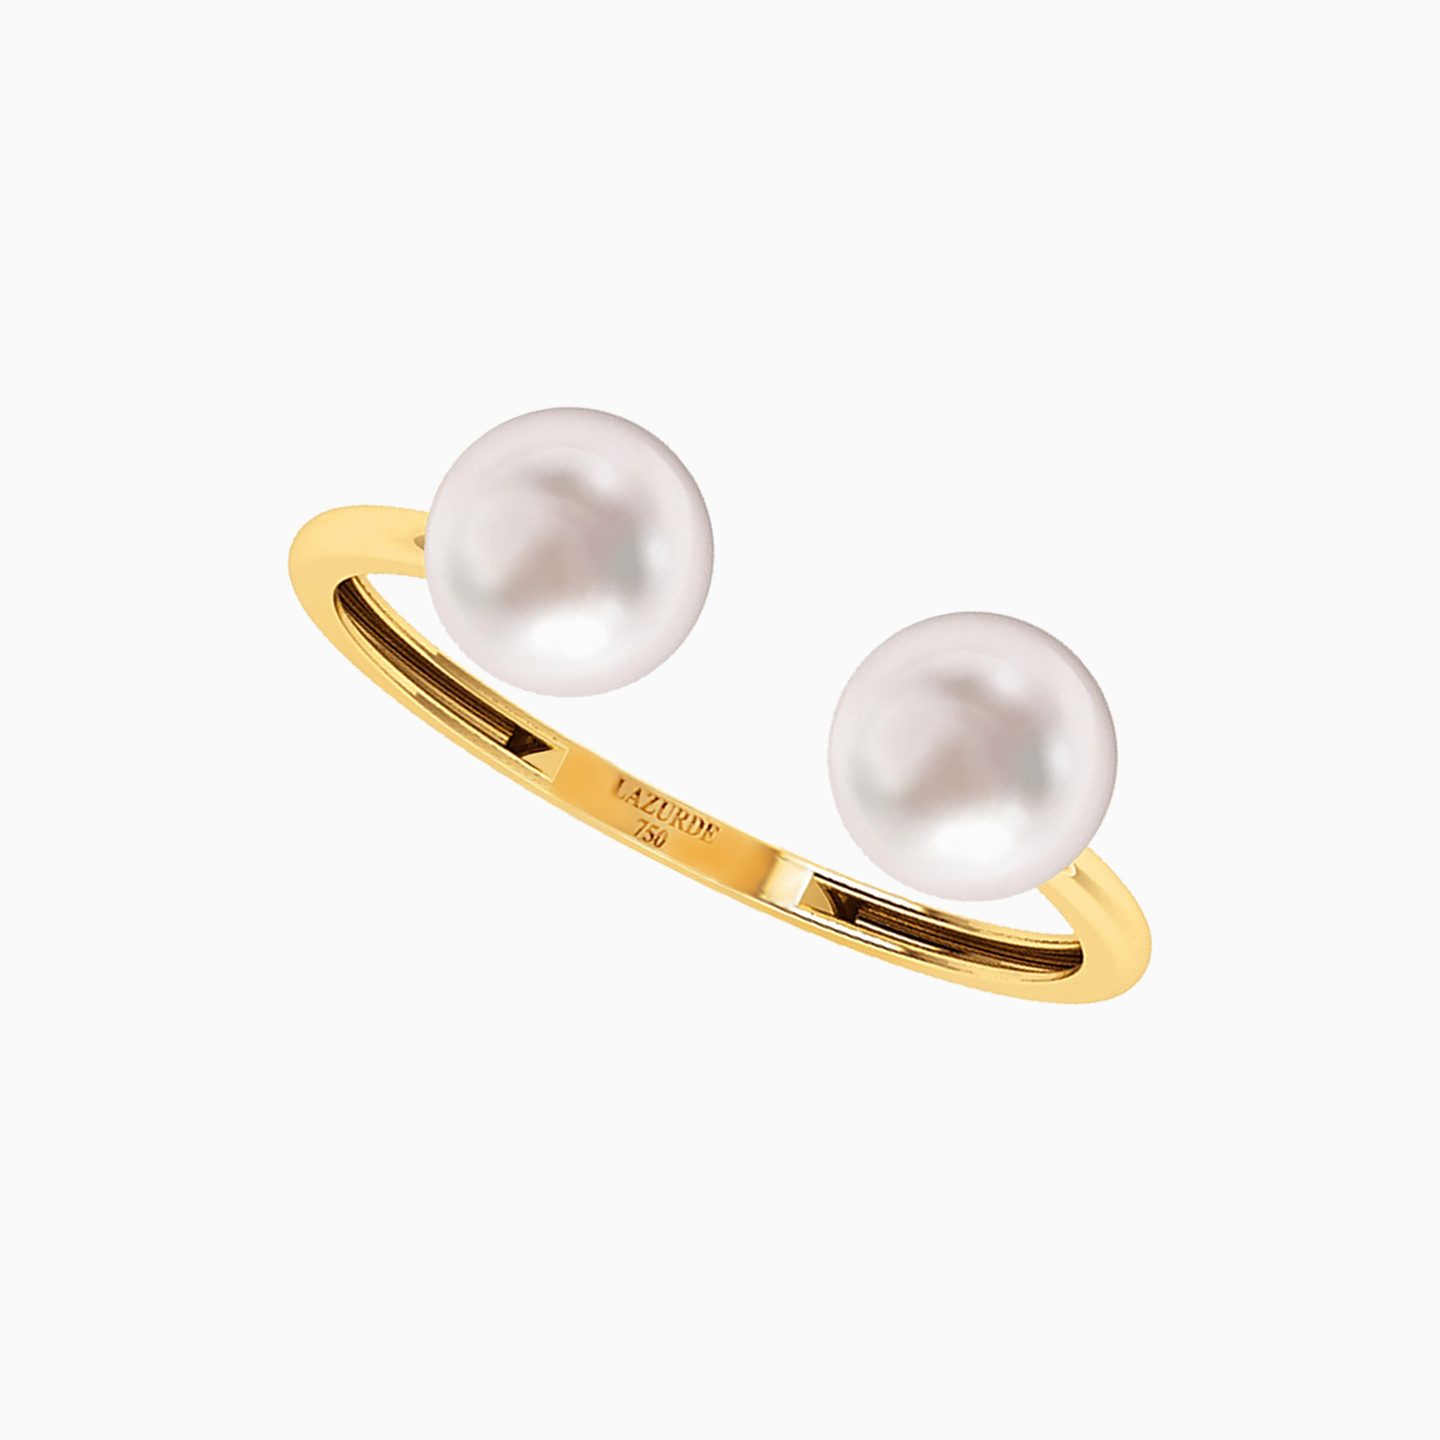 18K Gold Pearls Two-headed Ring - 2